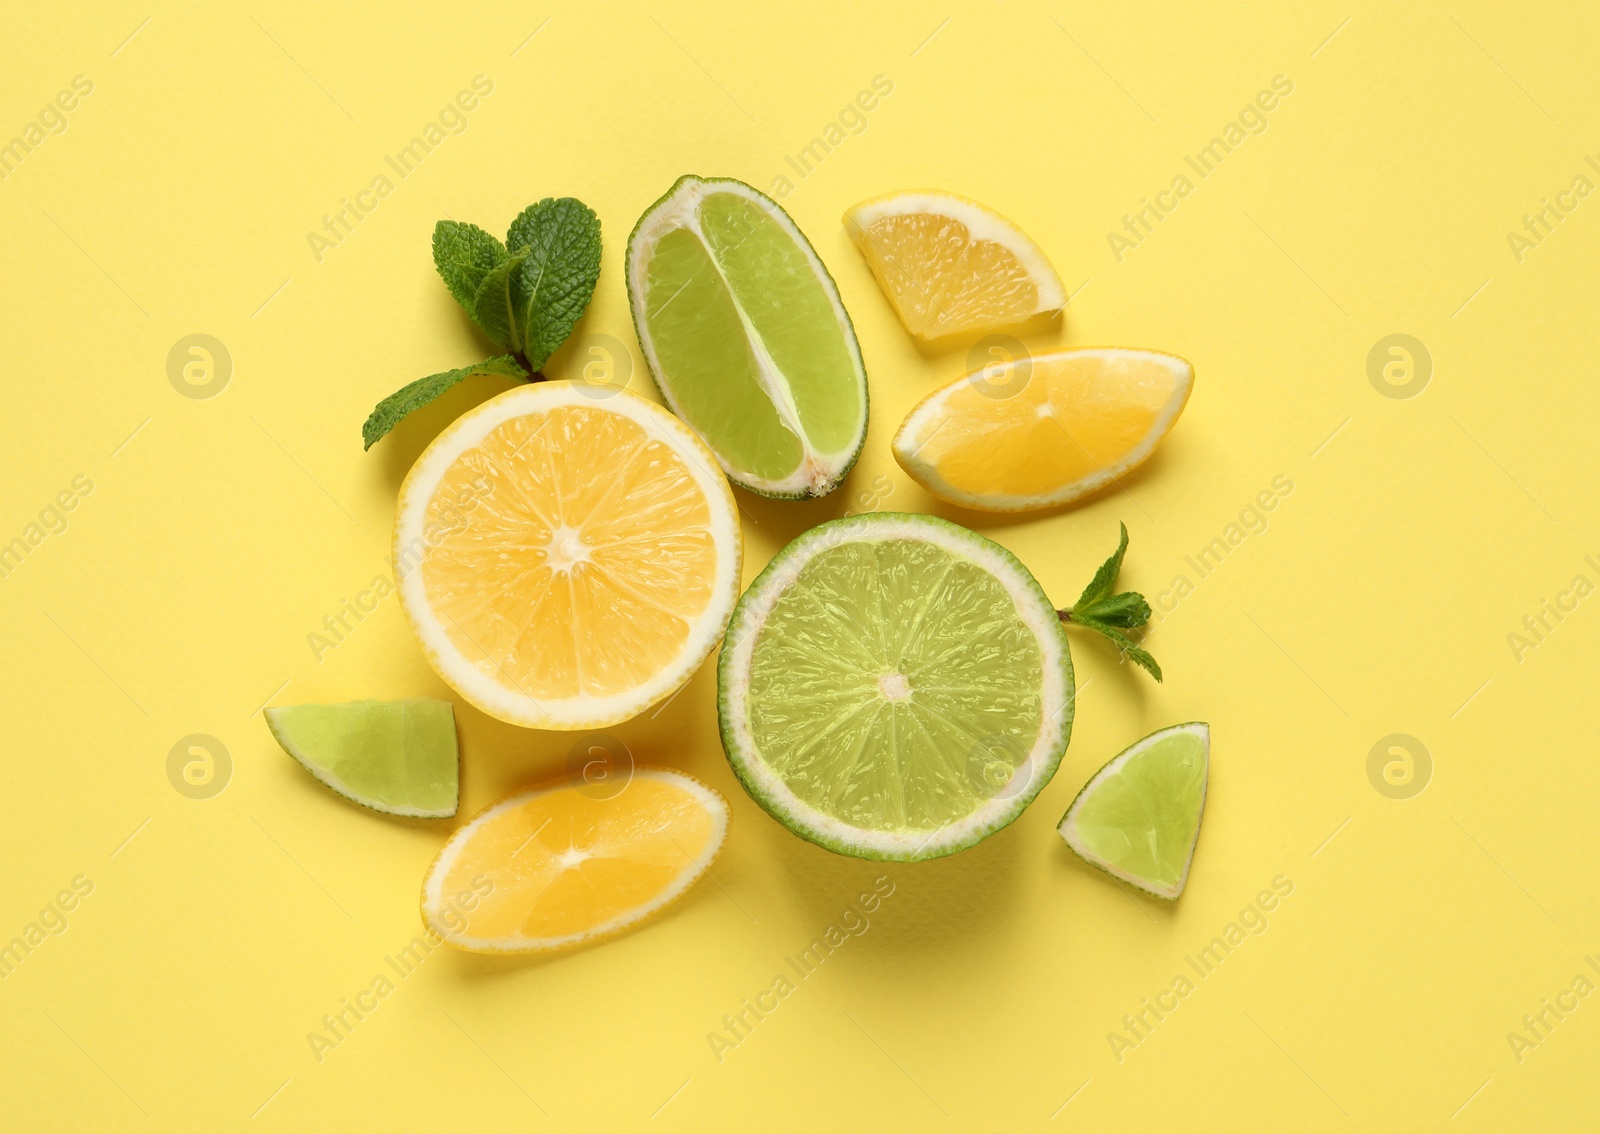 Photo of Fresh ripe lemons, limes and mint leaves on yellow background, flat lay